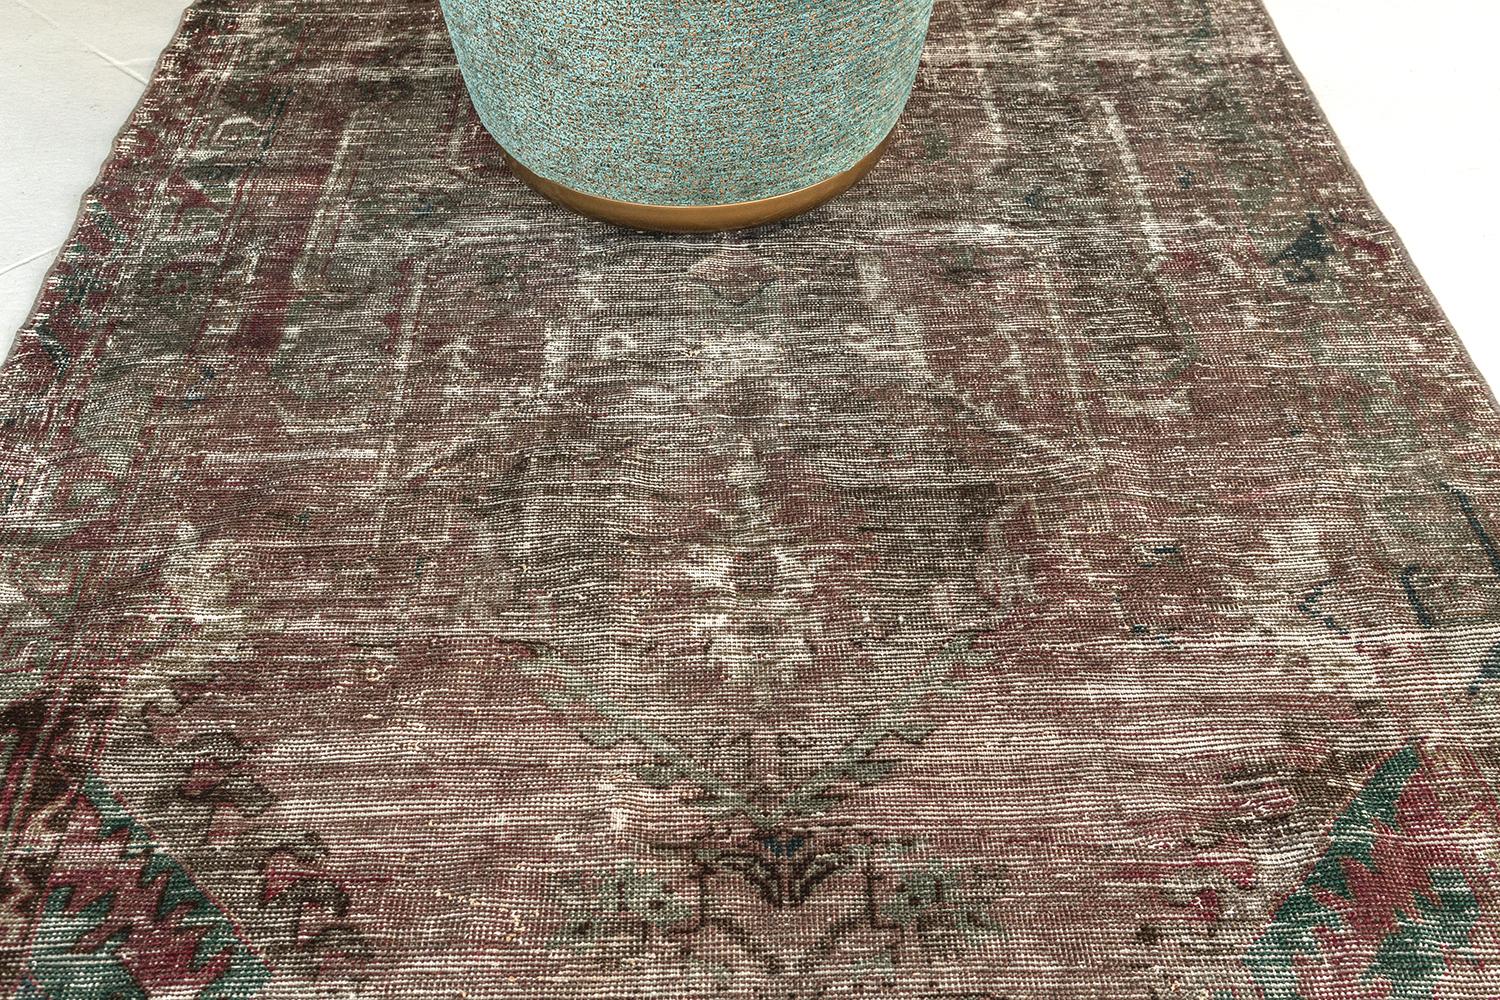 A Vintage Turkish Anatolian rug that is poised to impress. Characterized by its ornate botanical details and vibrant colour scheme, this elaborate design creates a mesmerizing sense of well-balanced proportions. Taking center stage is a central